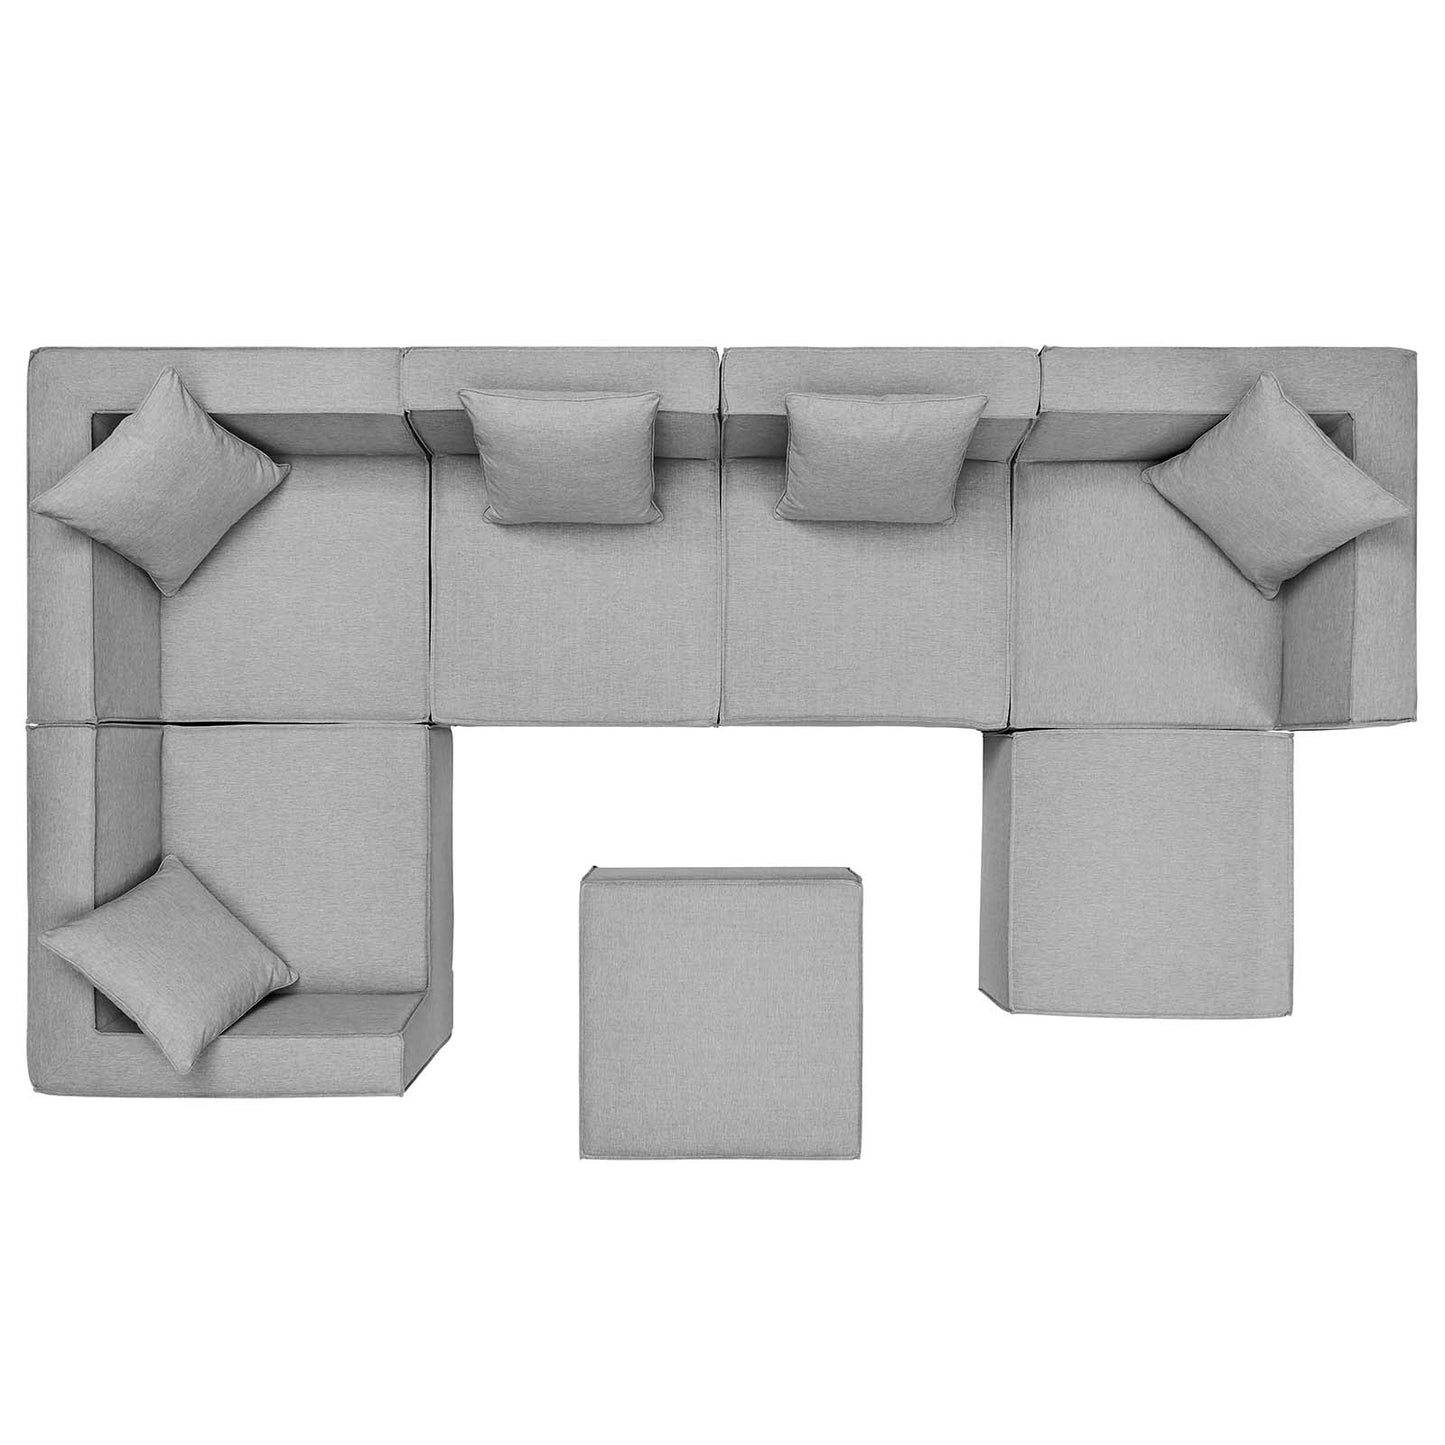 Saybrook Outdoor Patio Upholstered 7-Piece Sectional Sofa Gray EEI-4387-GRY